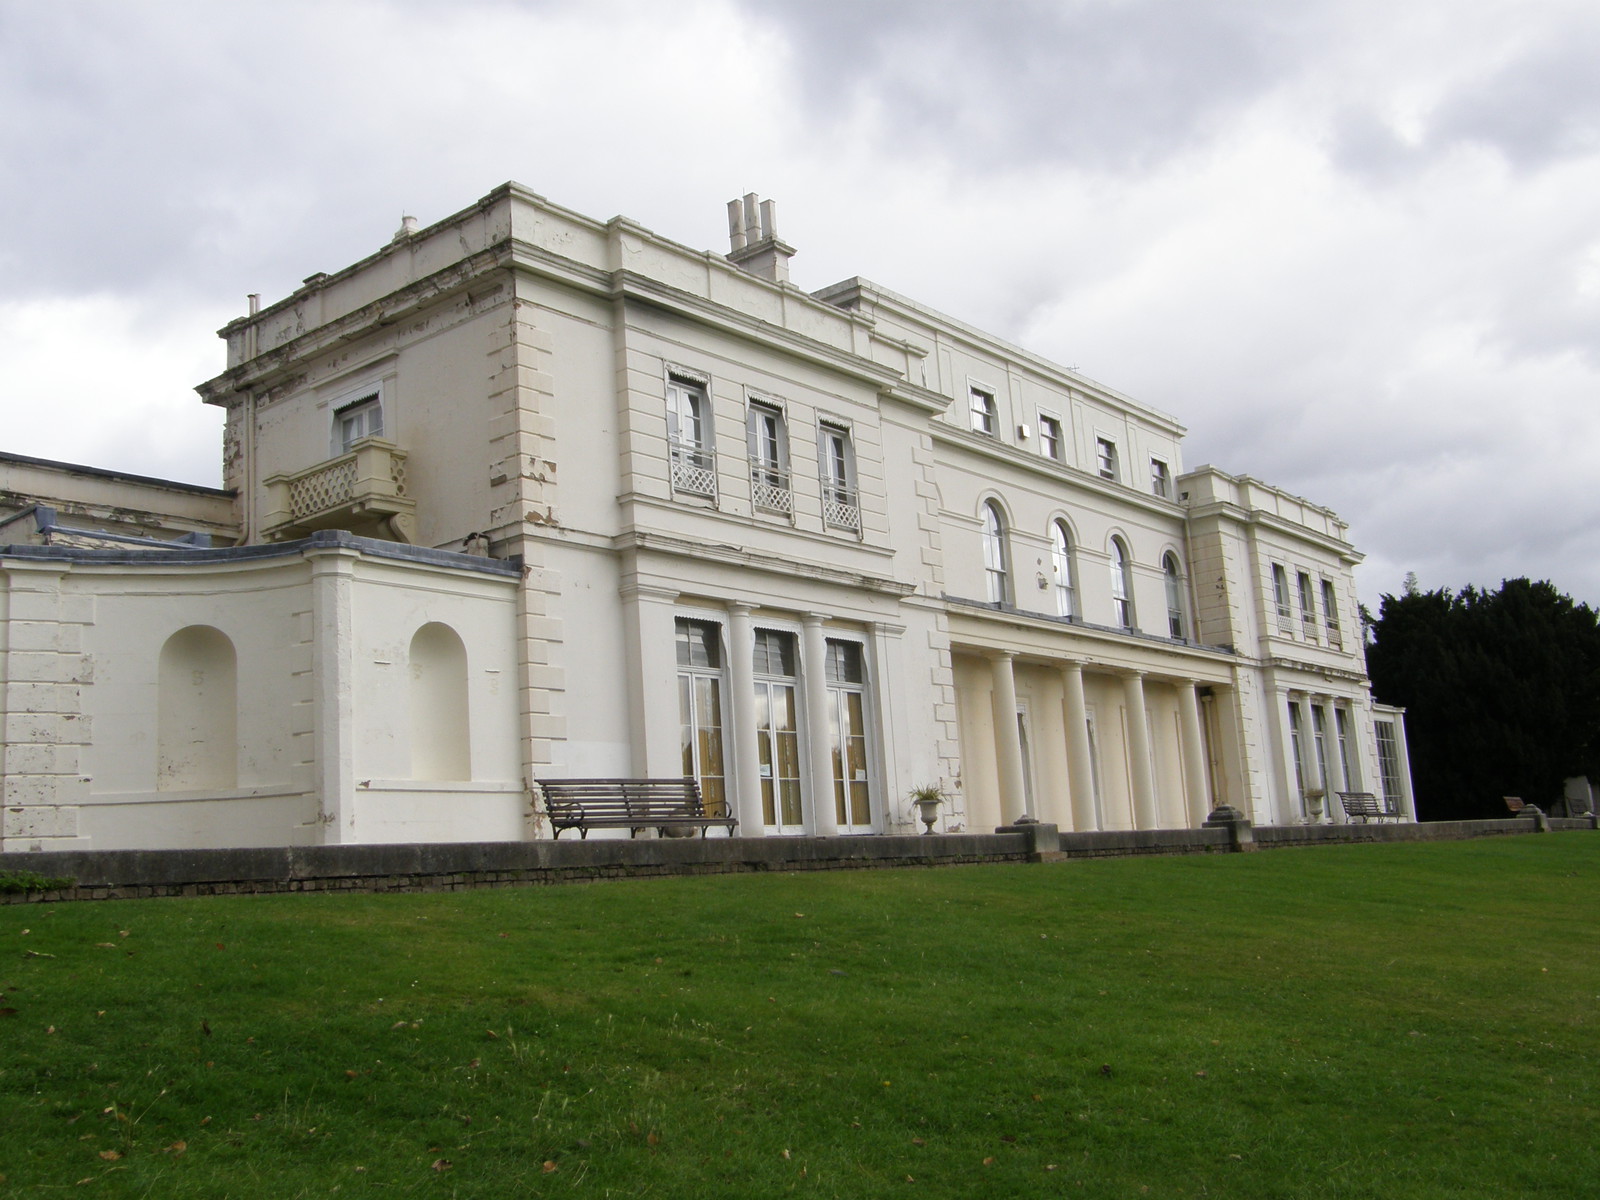 The Large Mansion in Gunnersbury Park